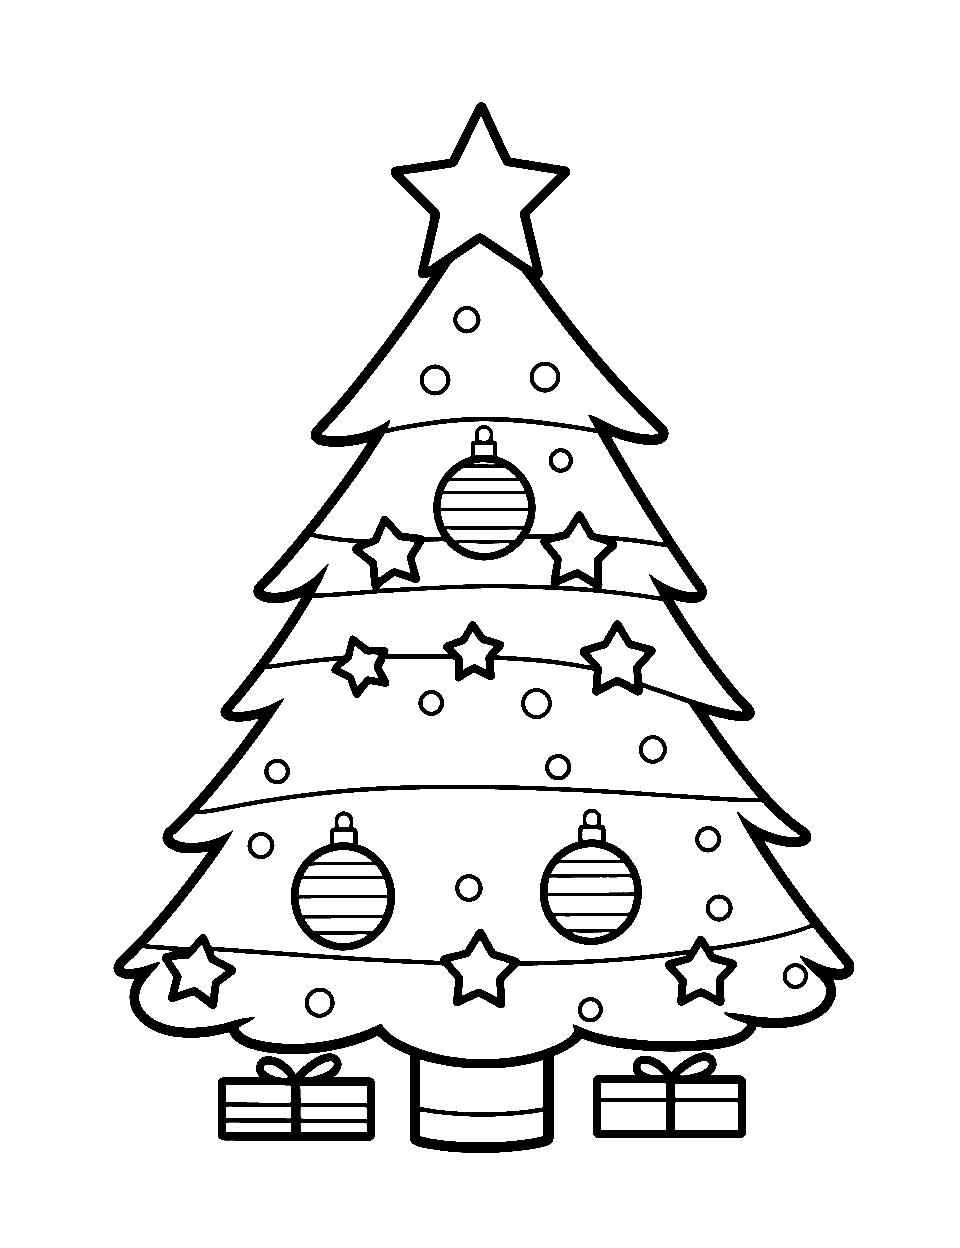 Simple Kindergarten Christmas Tree Coloring Page - A plain and simple Christmas tree with round ornaments and a star, designed for kindergarten kids to enjoy coloring.